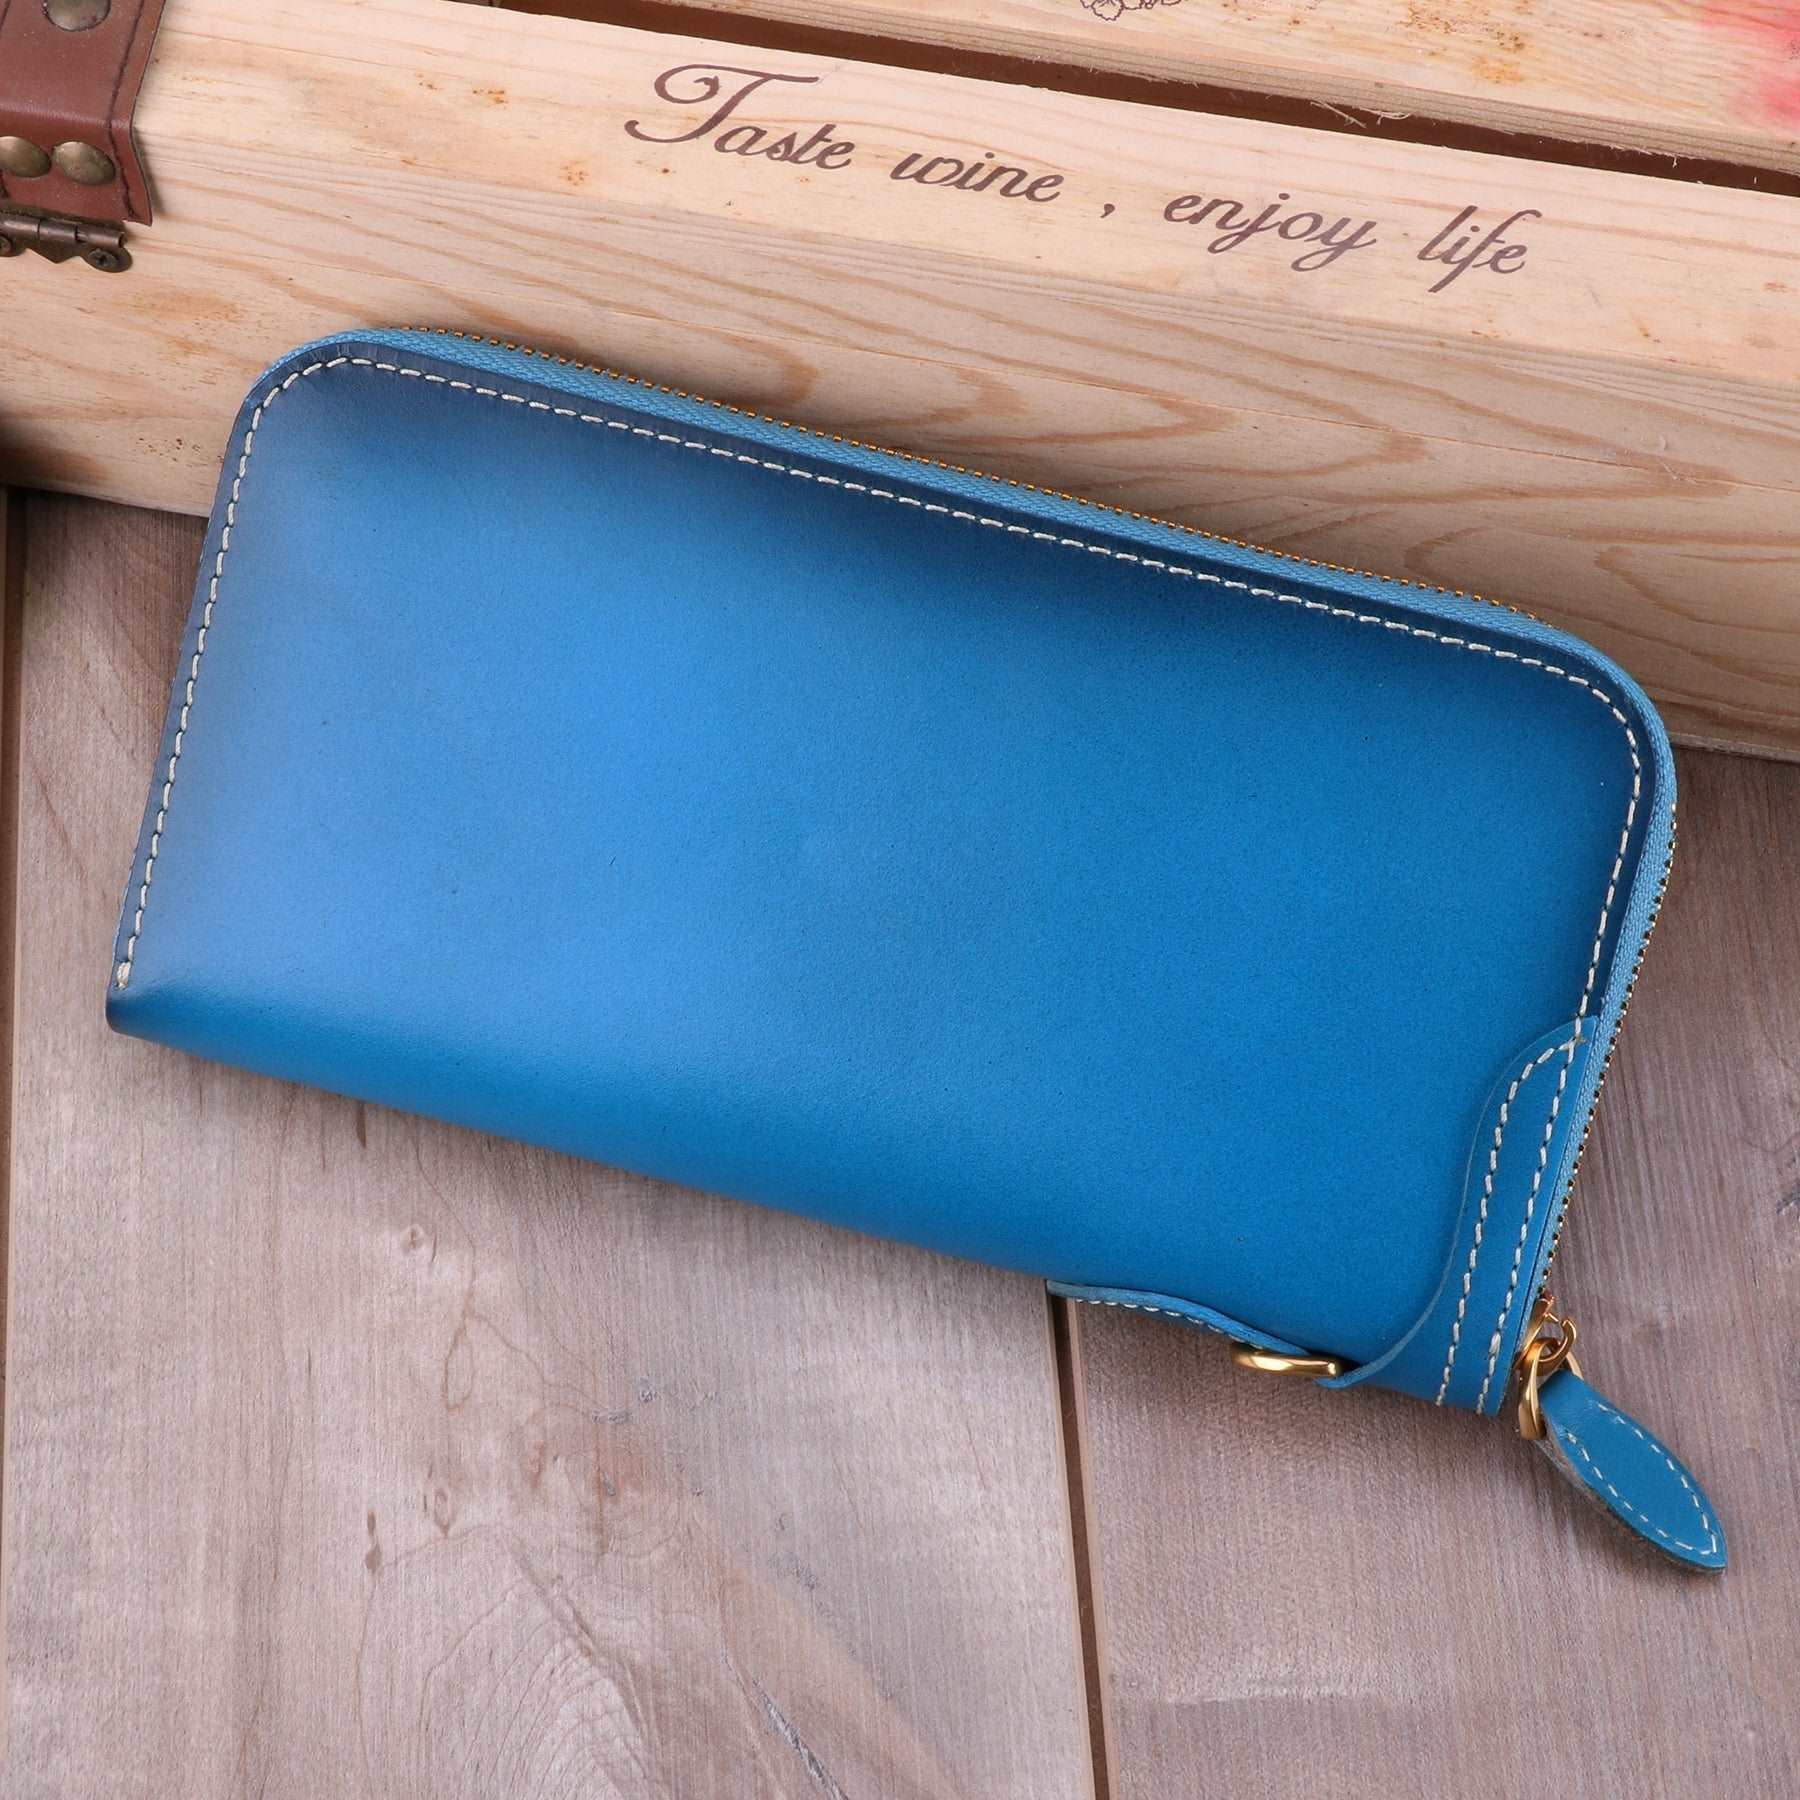 Sophisticated Leather Women's Wallet with Zip Around Closure woyaza